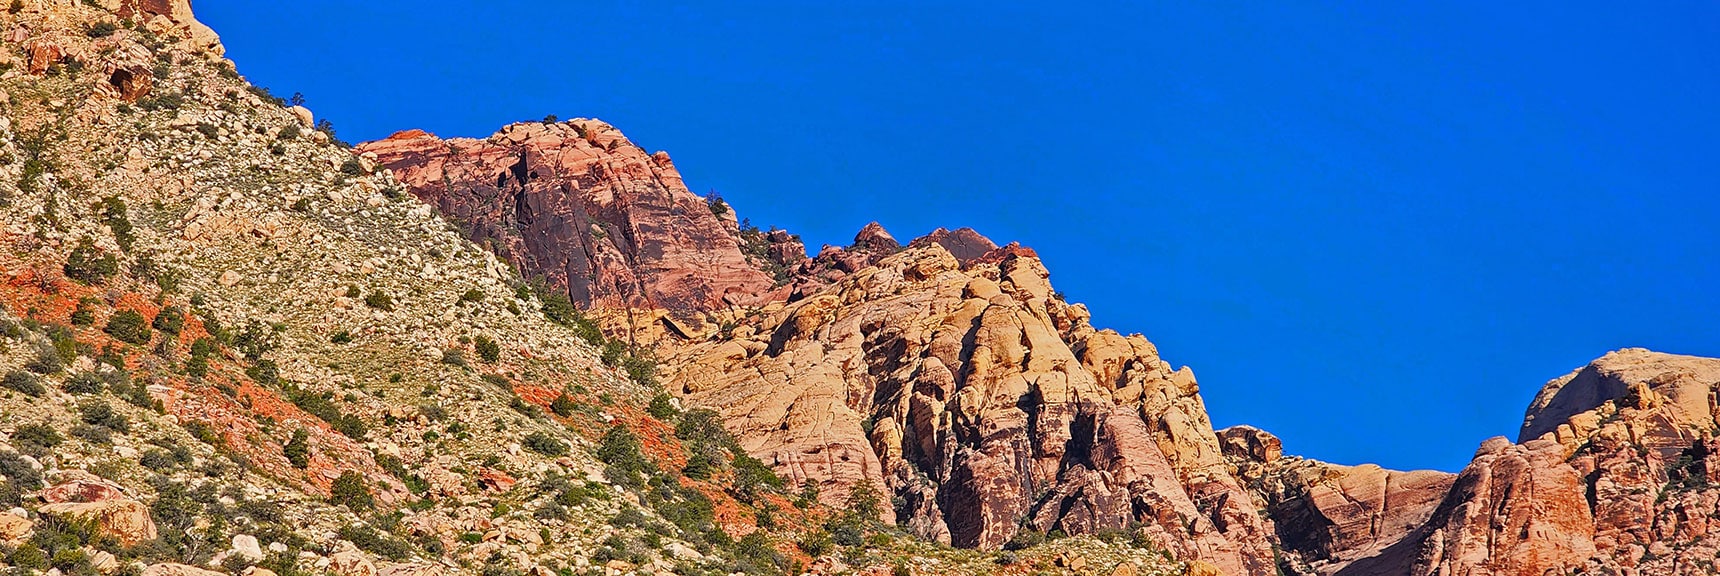 Southern Perspective of Juniper Peak Summit Area | Knoll Trail | Red Rock Canyon National Conservation Area, Nevada | David Smith | LasVegasAreaTrails.com